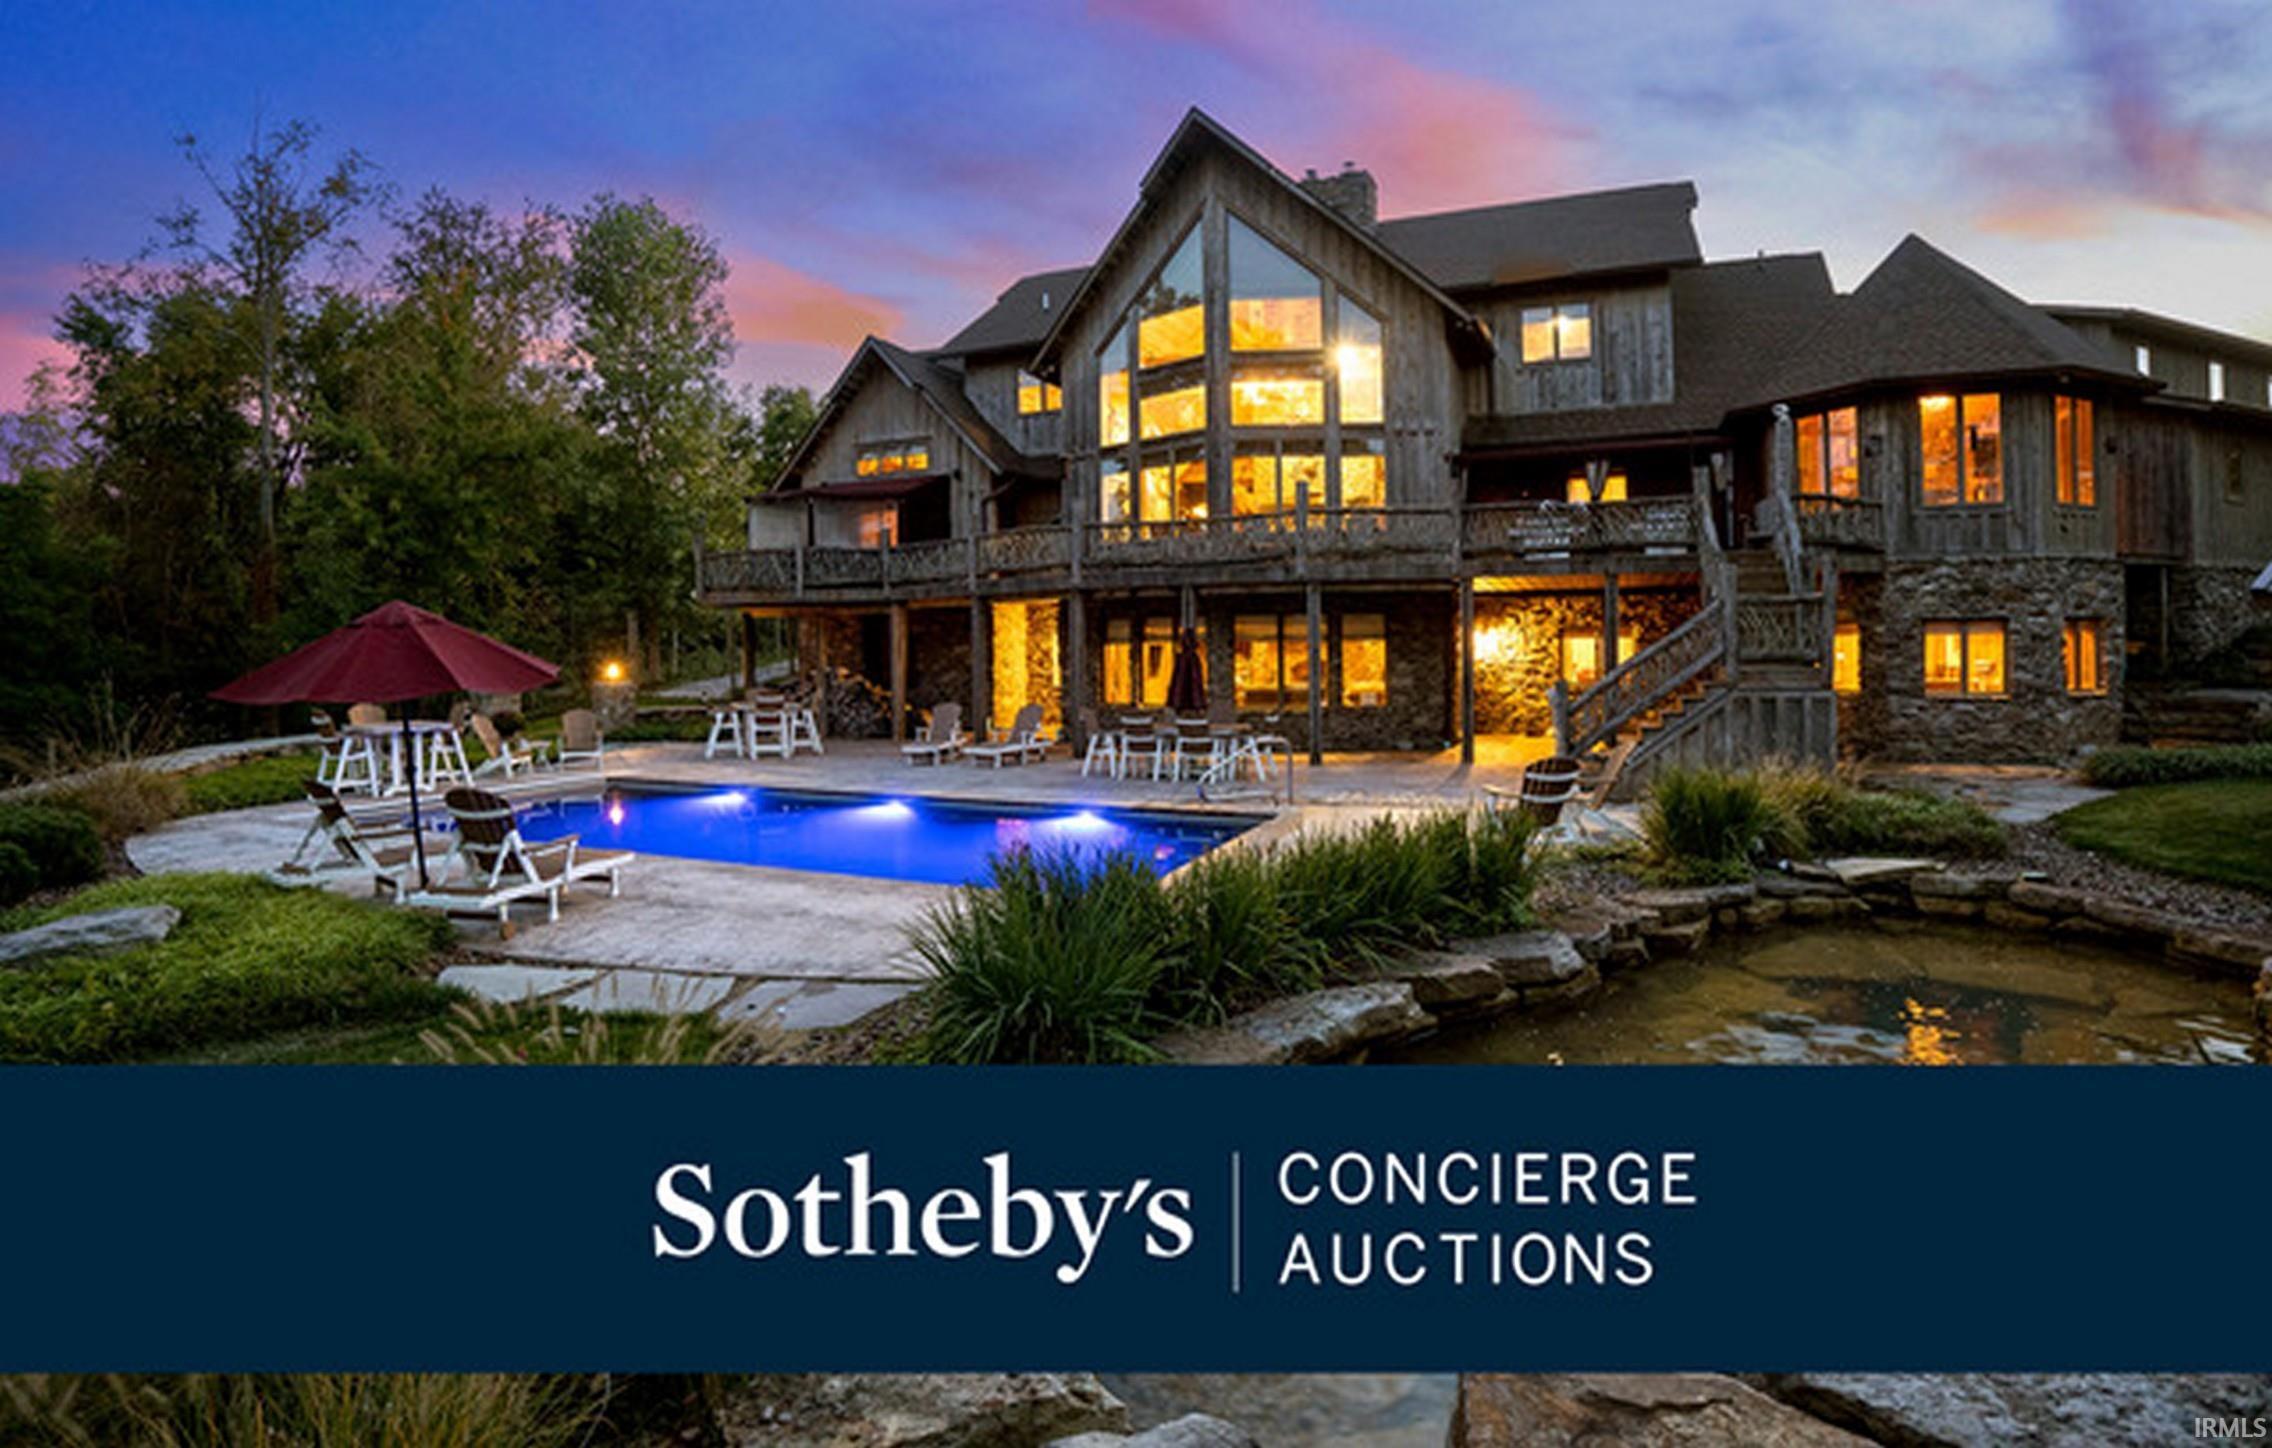 AUCTION: BID 16–30 MAY. Listed for $3.495M. No Reserve. Starting Bids Expected Between $900K–$1.6M.  Camelot Ridge Resort is an outdoorsman's oasis in the heart of Indiana. This hunter's retreat boasts an expansive estate with 170-plus acres of pristine hardwood trees, rolling hills, miles of trails, and a serene lake that give way to a majestic lodge. Experience nature's glory in every season across this six-bedroom estate built with reclaimed lumber featuring soaring ceilings, with abundant wildlife available and many established hunting rifle, bow, and tower blinds throughout the property. Use this retreat as your personal adventure retreat or for hosting large groups. The impeccable surroundings, both in the land and structures, will delight as you relax in the heated pool, enjoy ample seating around the fire pit, unwind in the 10-person hot tub, put your feet up in the theater room, or work out in the exercise room to refresh and prepare for the next day’s activities. Additional buildings include a barn, bunkhouse, professionally designed shooting range, and storage.